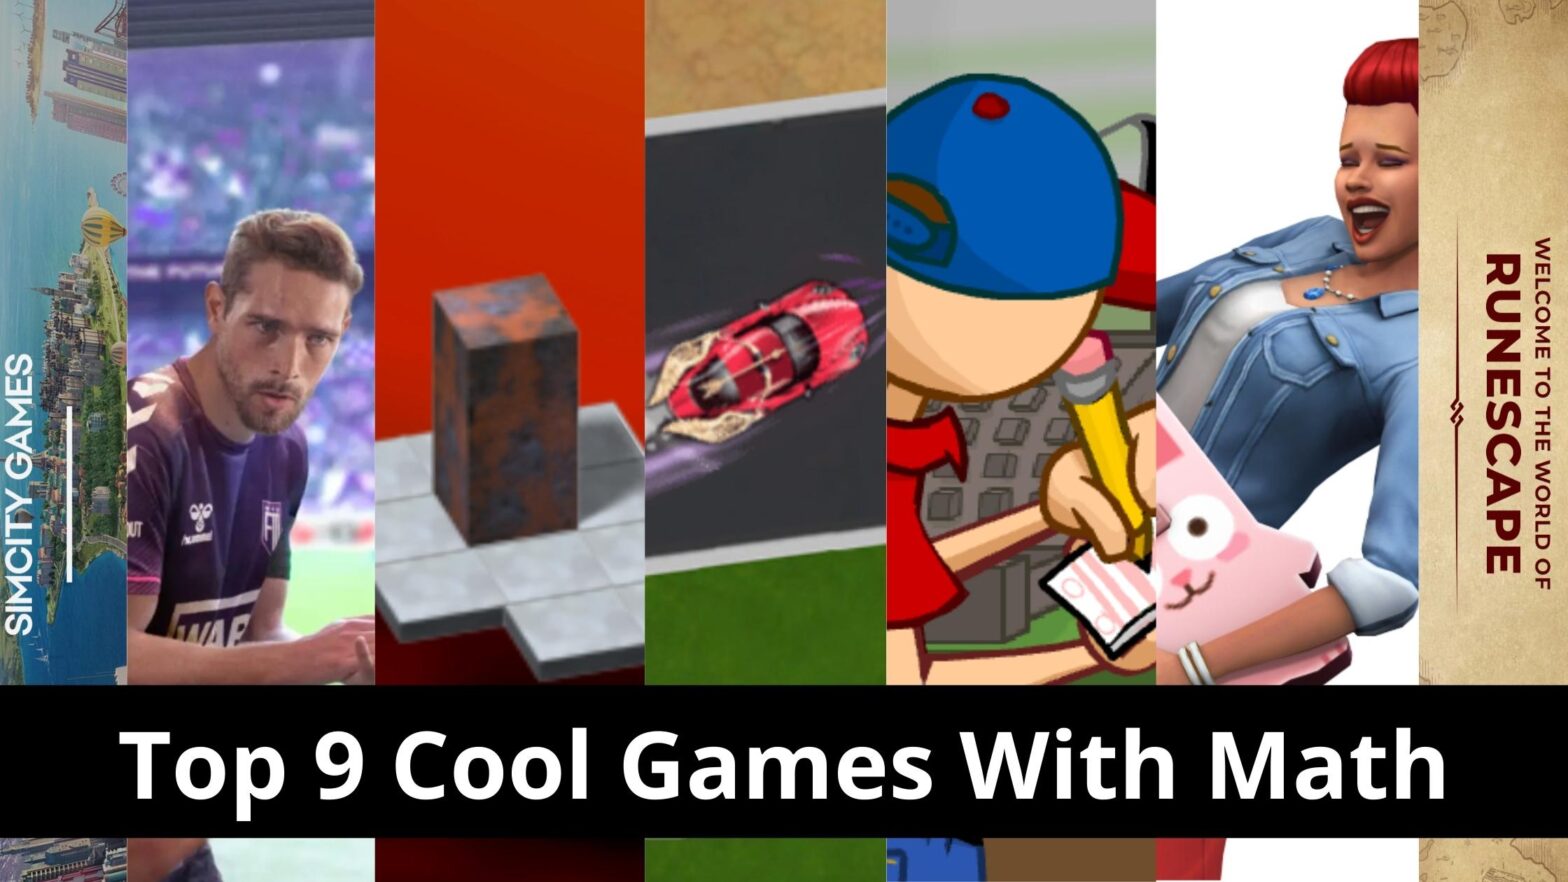 Top 9 Cool Games With Math